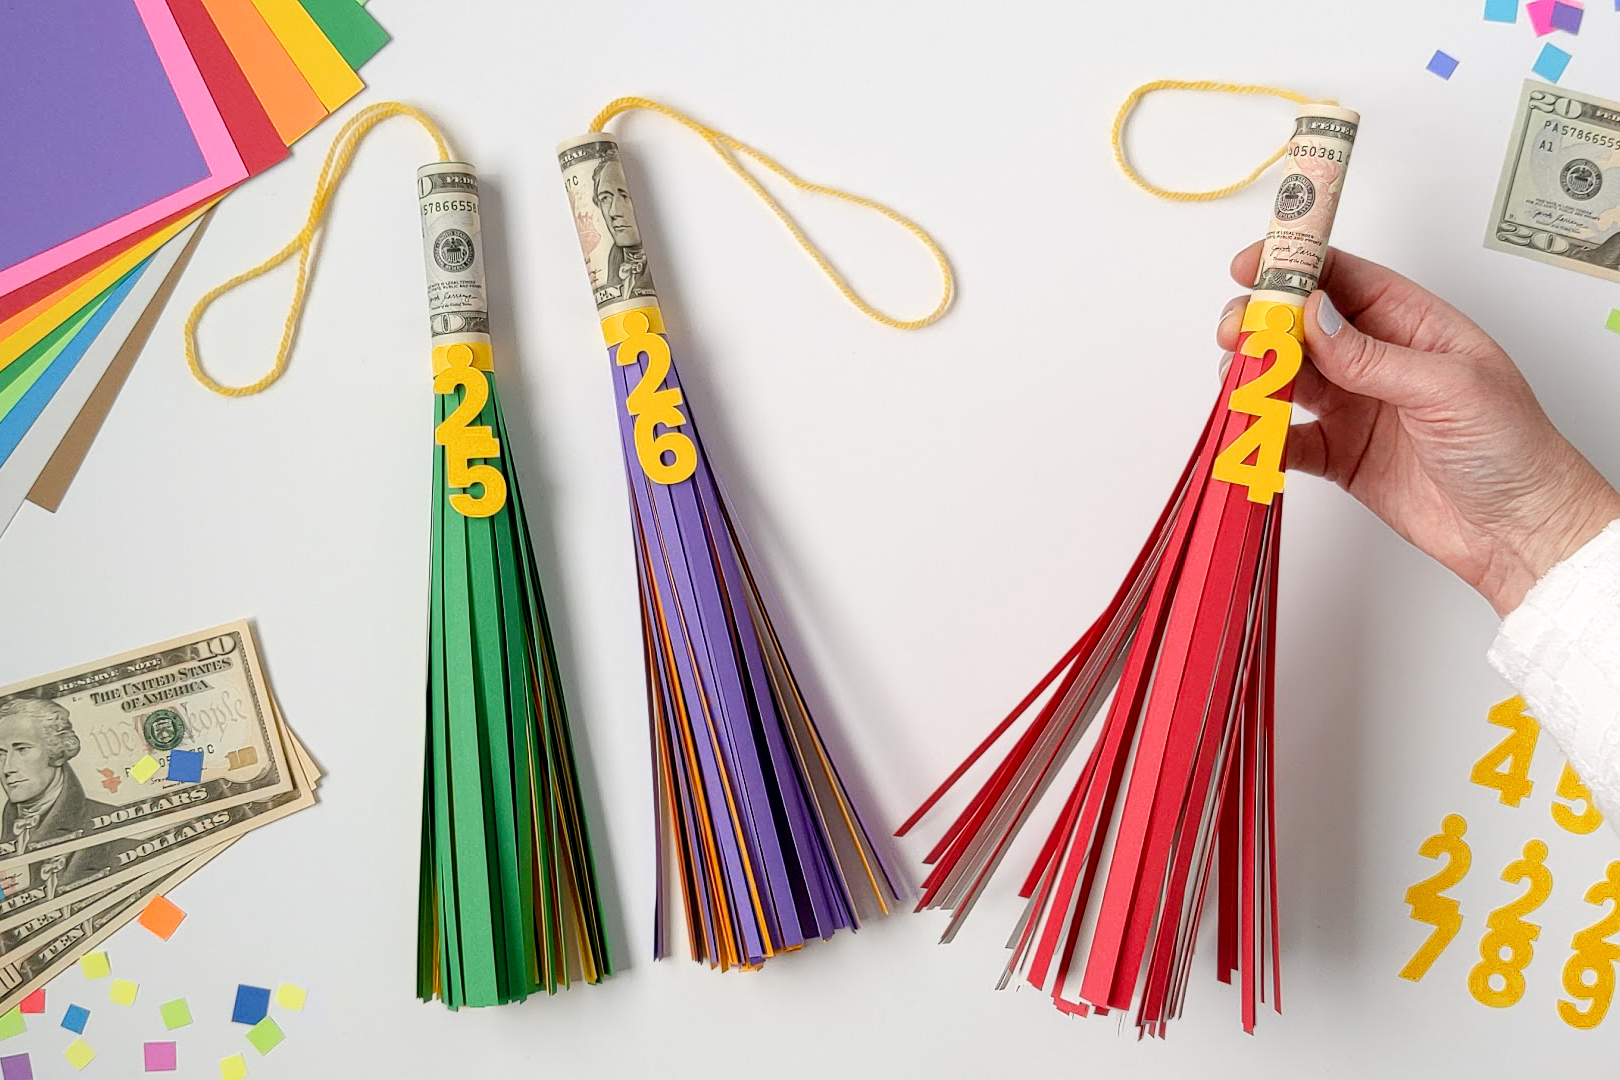 Cash rolled on the top of paper graduation tassels as a DIY graduation gift idea